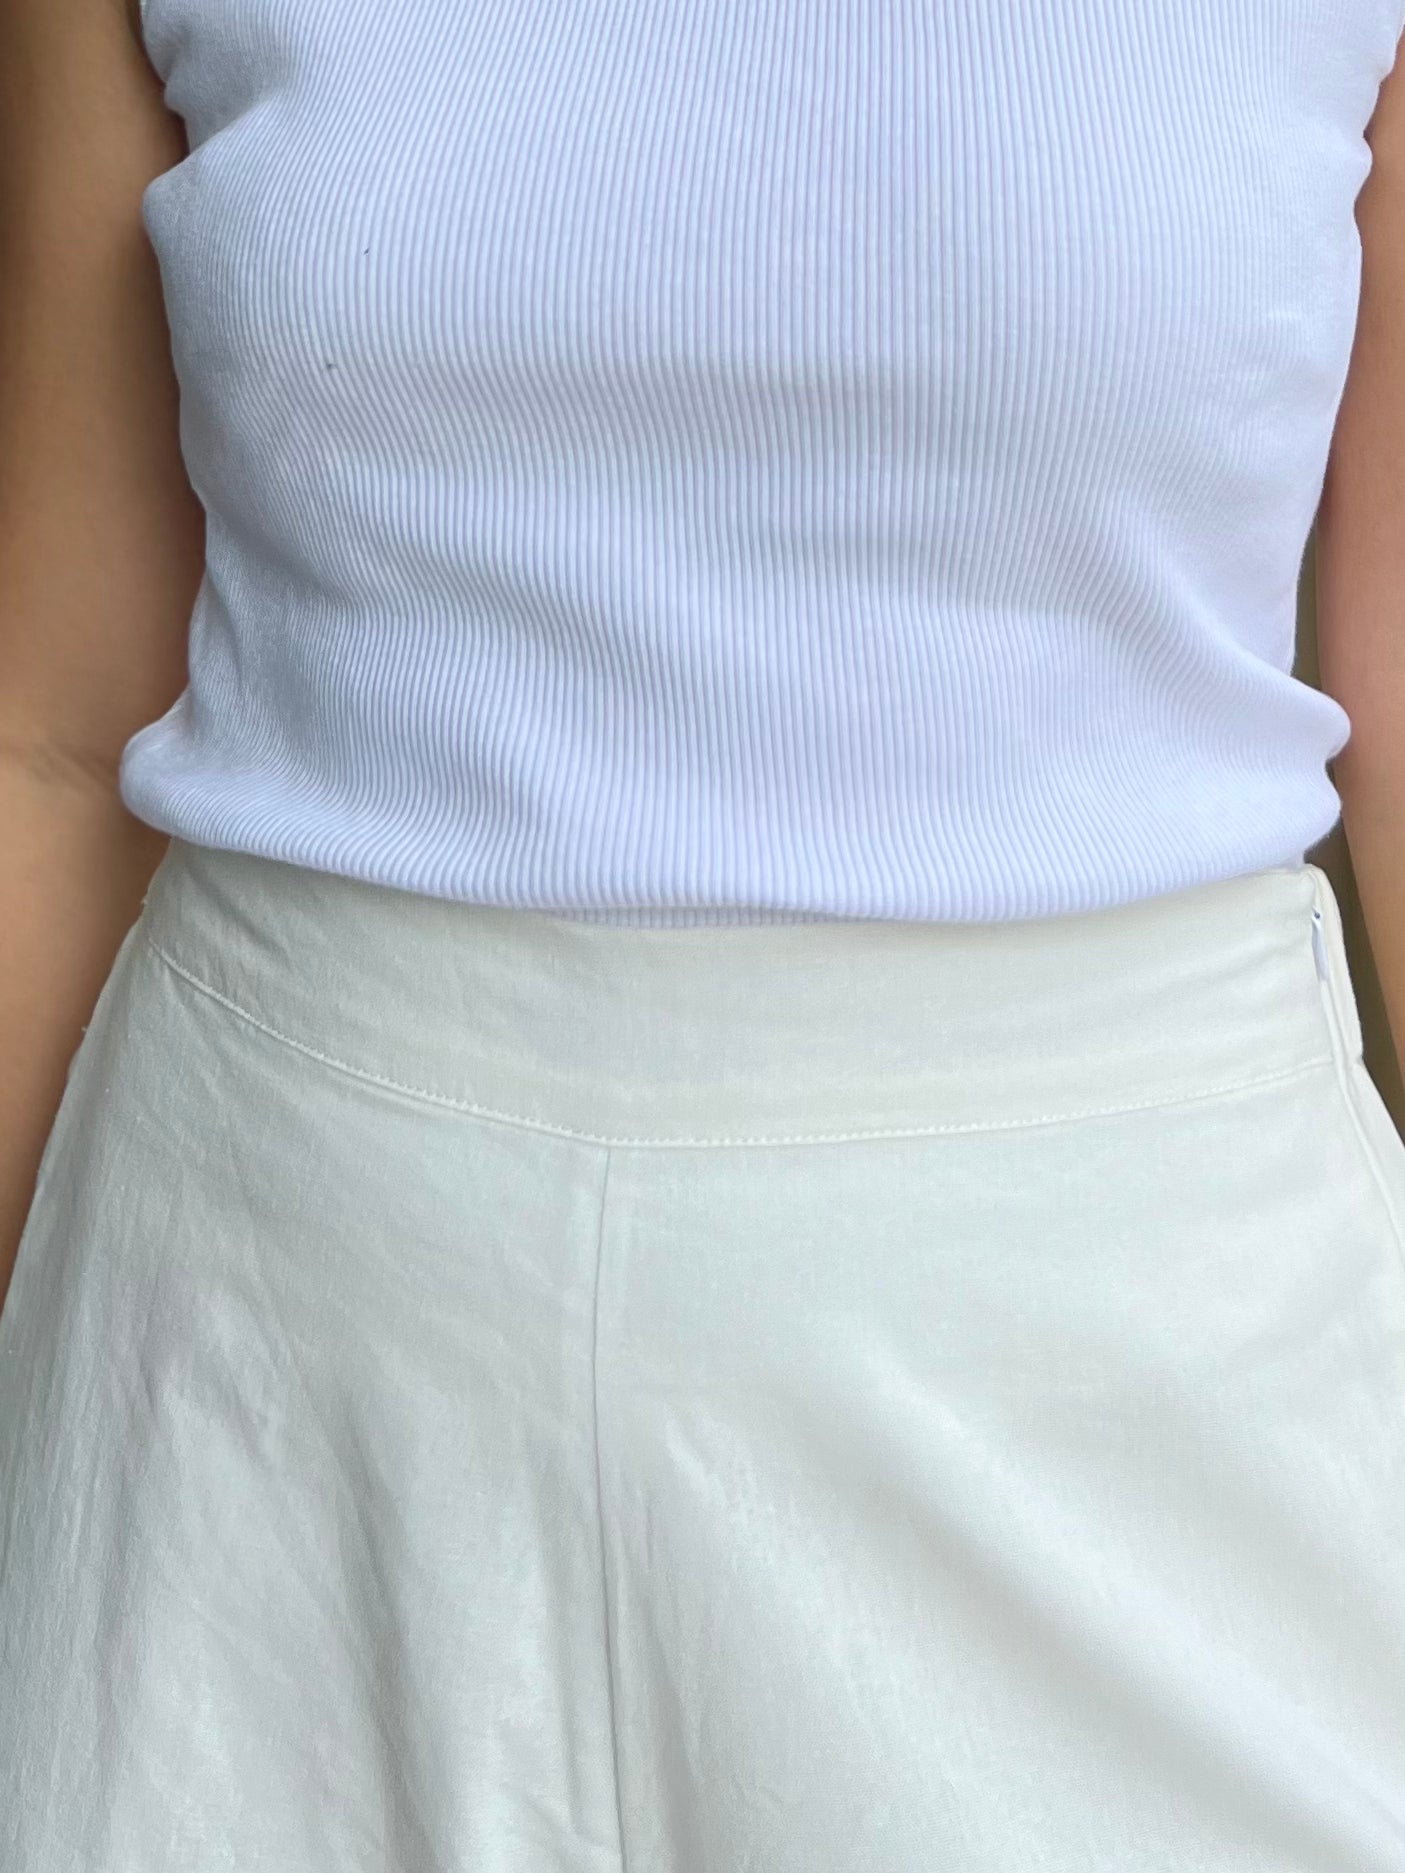 Santorini Pants in White with Lining